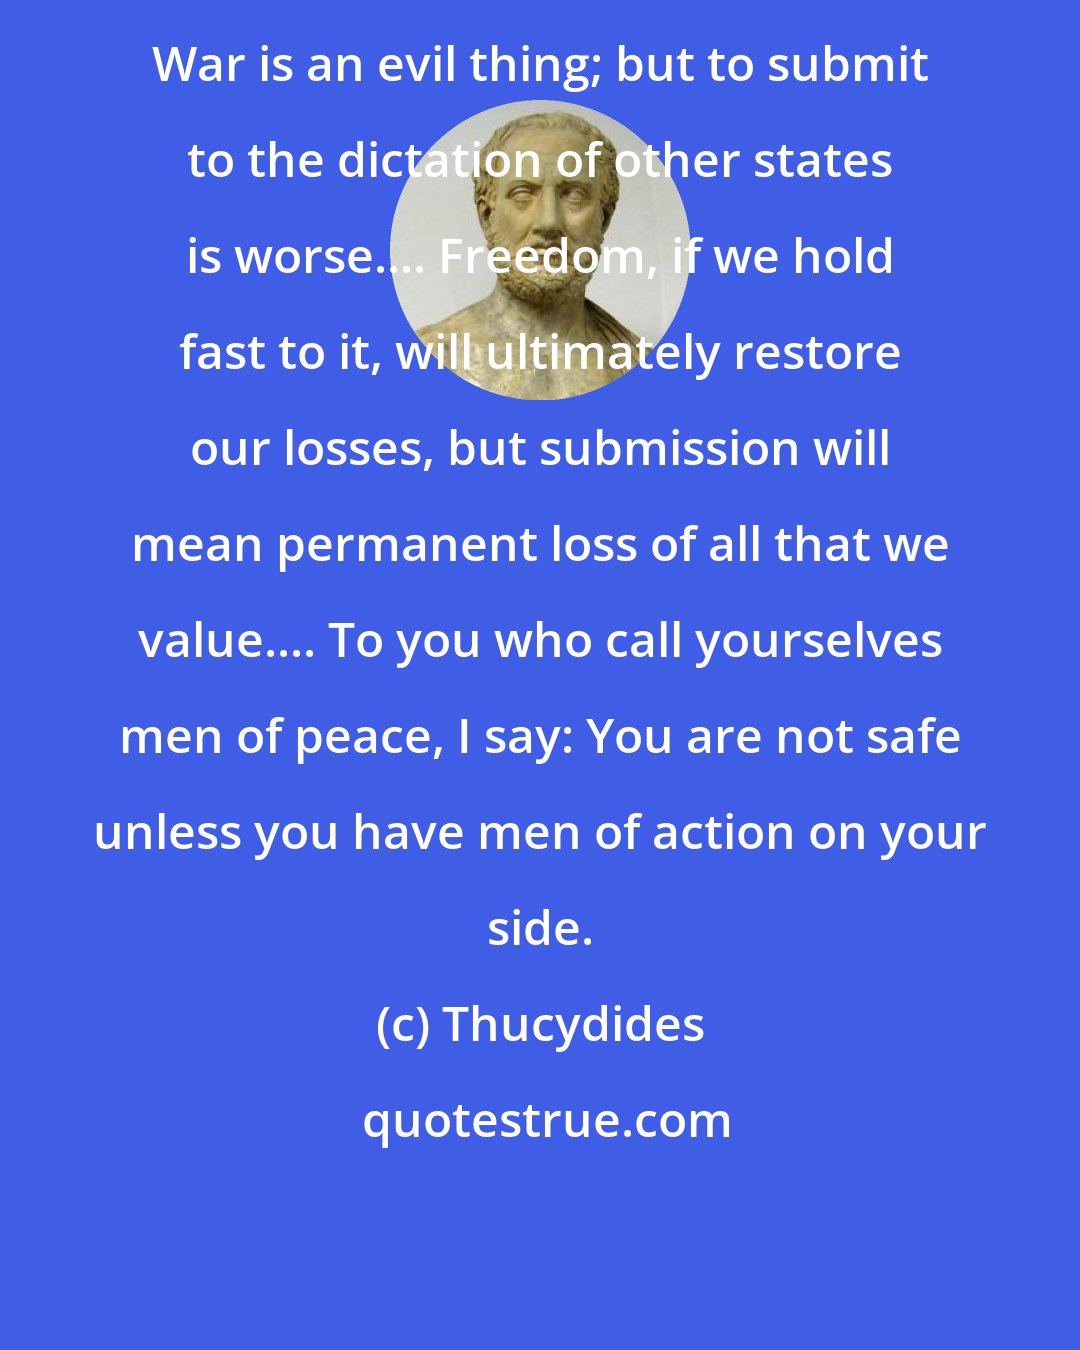 Thucydides: War is an evil thing; but to submit to the dictation of other states is worse.... Freedom, if we hold fast to it, will ultimately restore our losses, but submission will mean permanent loss of all that we value.... To you who call yourselves men of peace, I say: You are not safe unless you have men of action on your side.